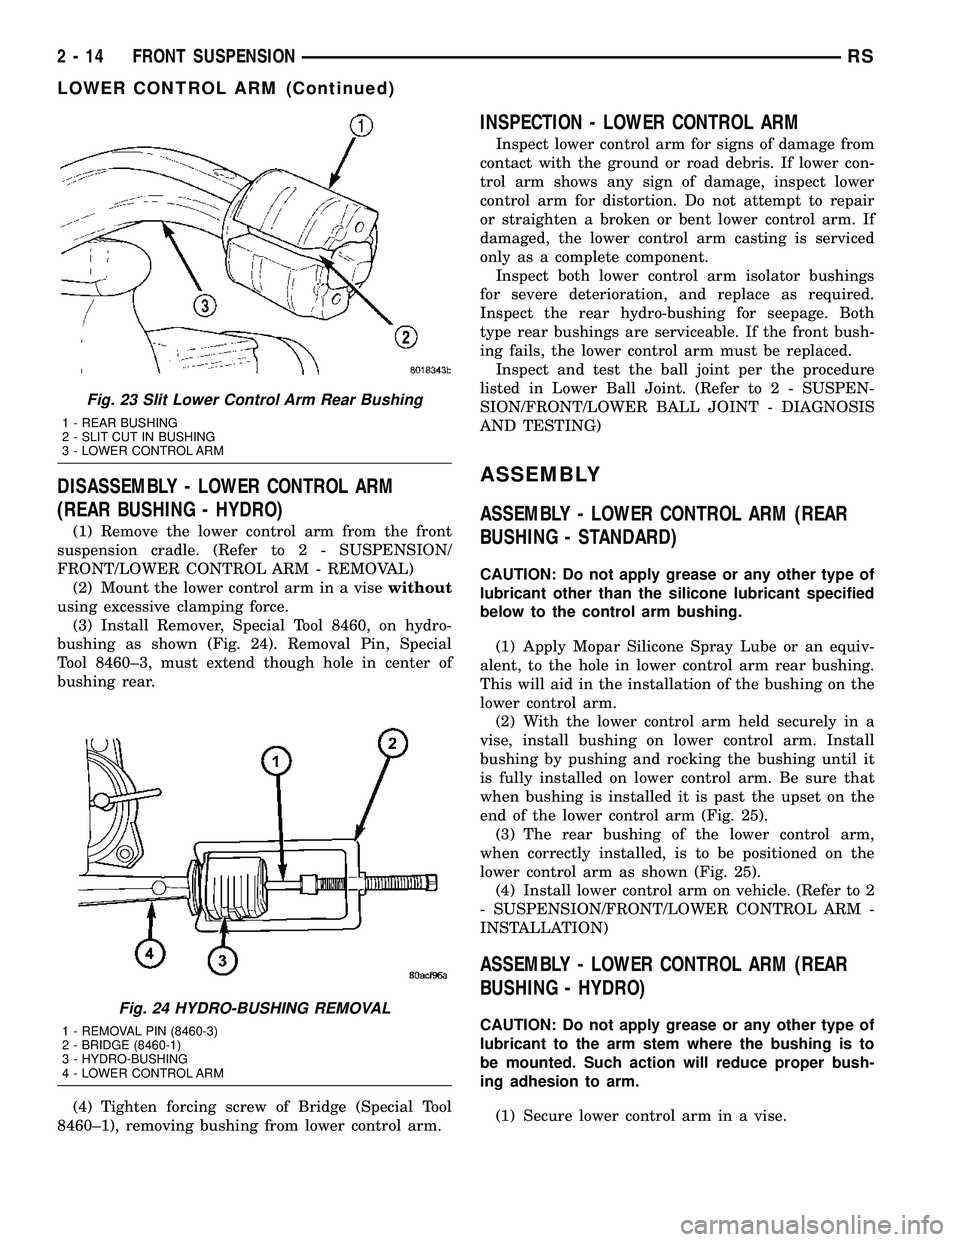 CHRYSLER VOYAGER 2004  Service Manual DISASSEMBLY - LOWER CONTROL ARM
(REAR BUSHING - HYDRO)
(1) Remove the lower control arm from the front
suspension cradle. (Refer to 2 - SUSPENSION/
FRONT/LOWER CONTROL ARM - REMOVAL)
(2) Mount the low